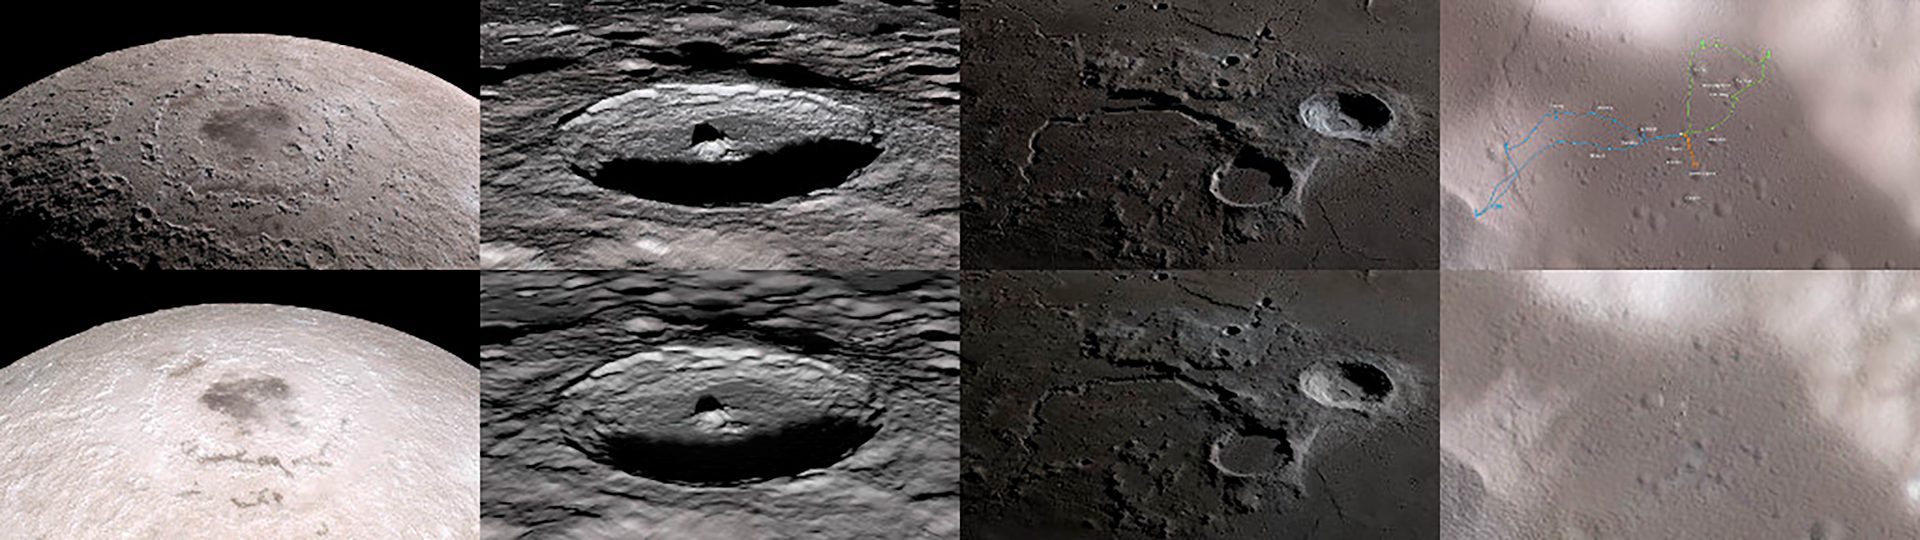 NASA recently captured 4K high-resolution images and videos of the moon